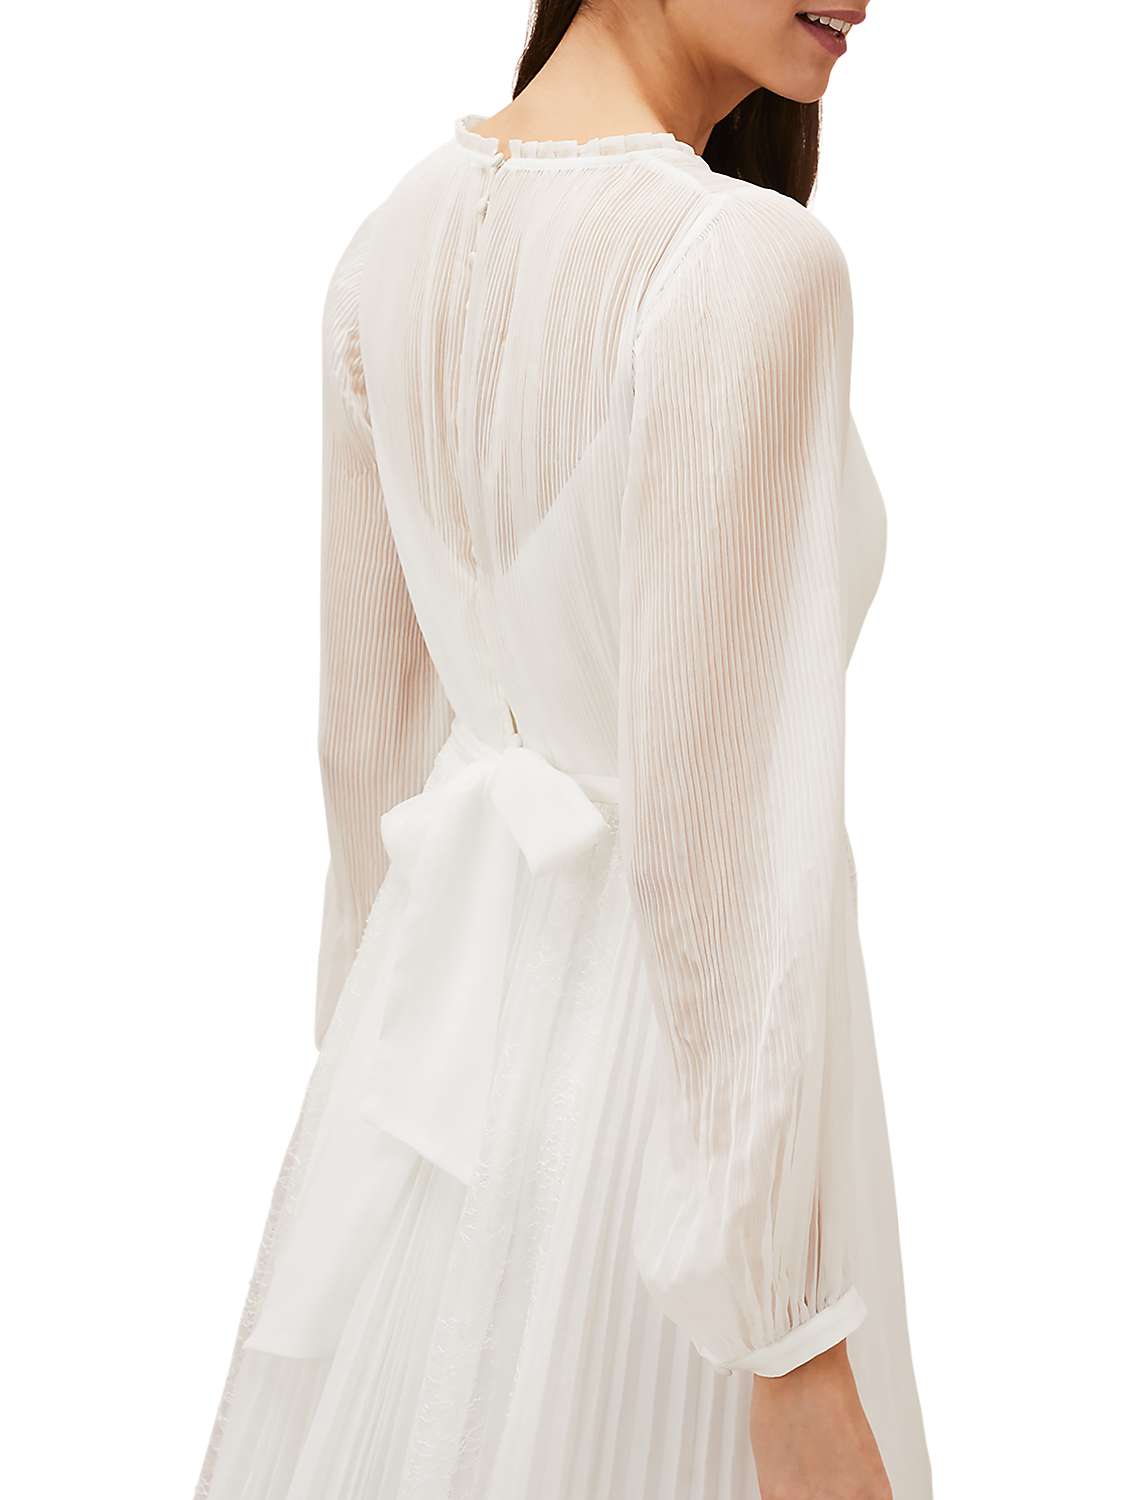 Buy Phase Eight Mariana Pleated Wedding Dress, Pearl Online at johnlewis.com